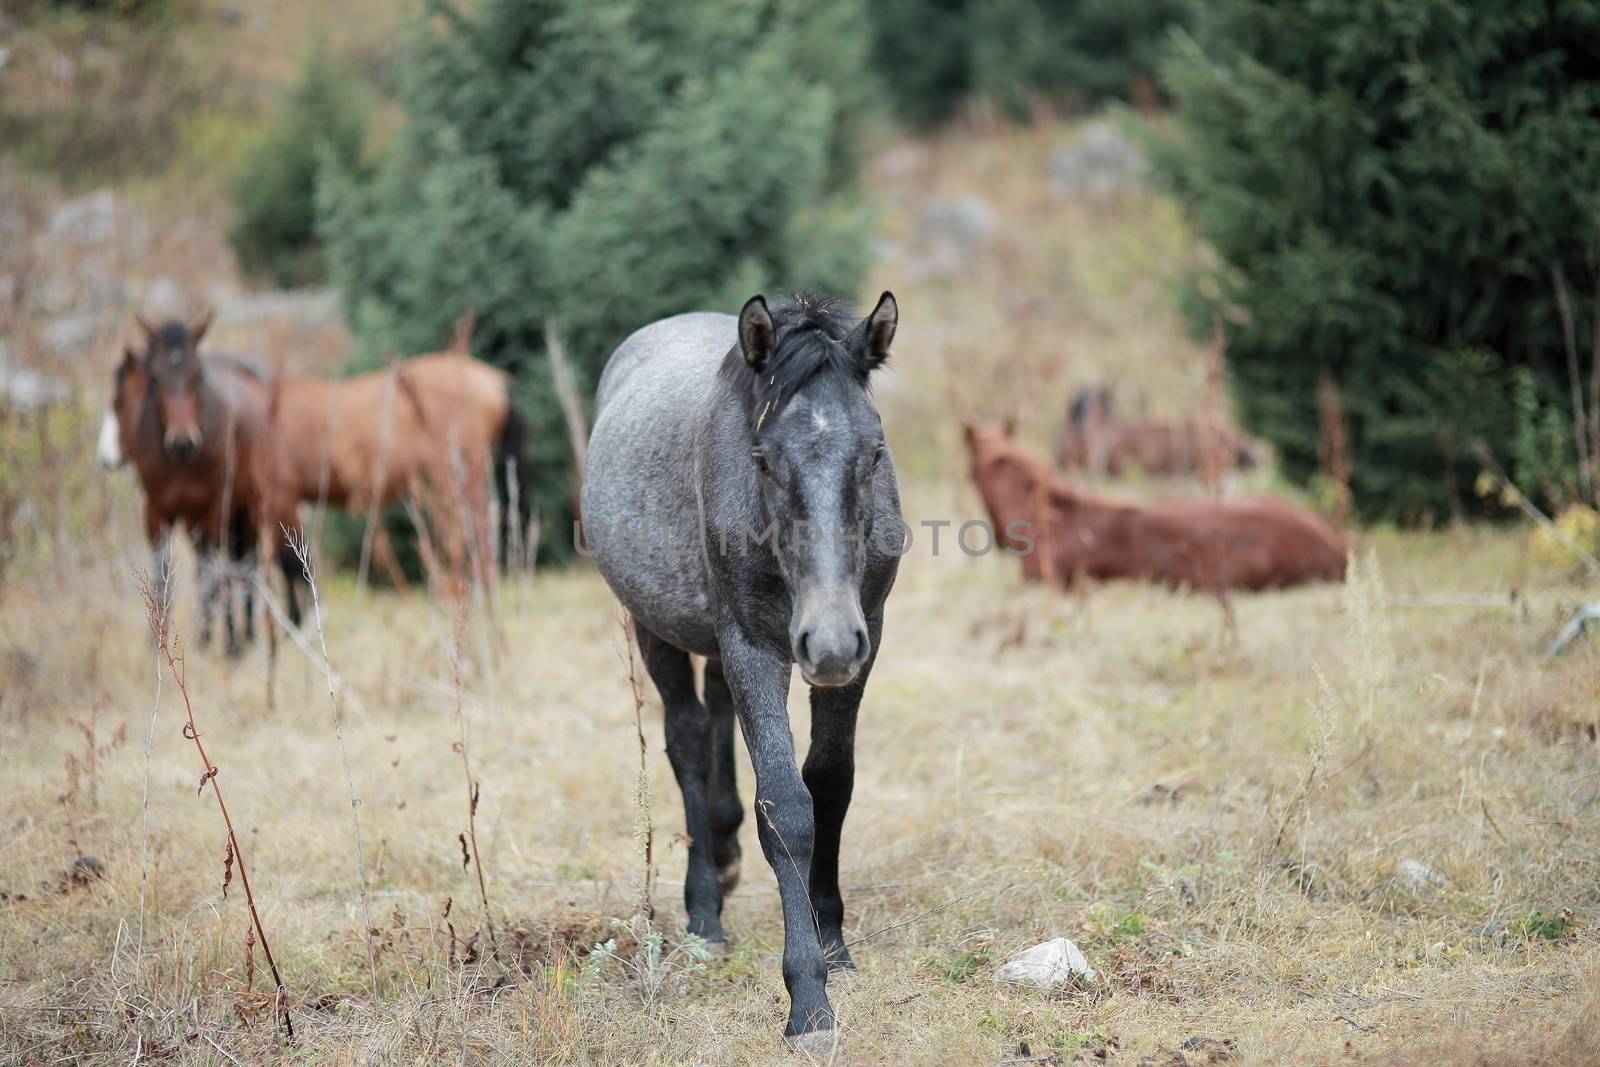 Cheerful gray horse on a lawn in the mountains by selinsmo